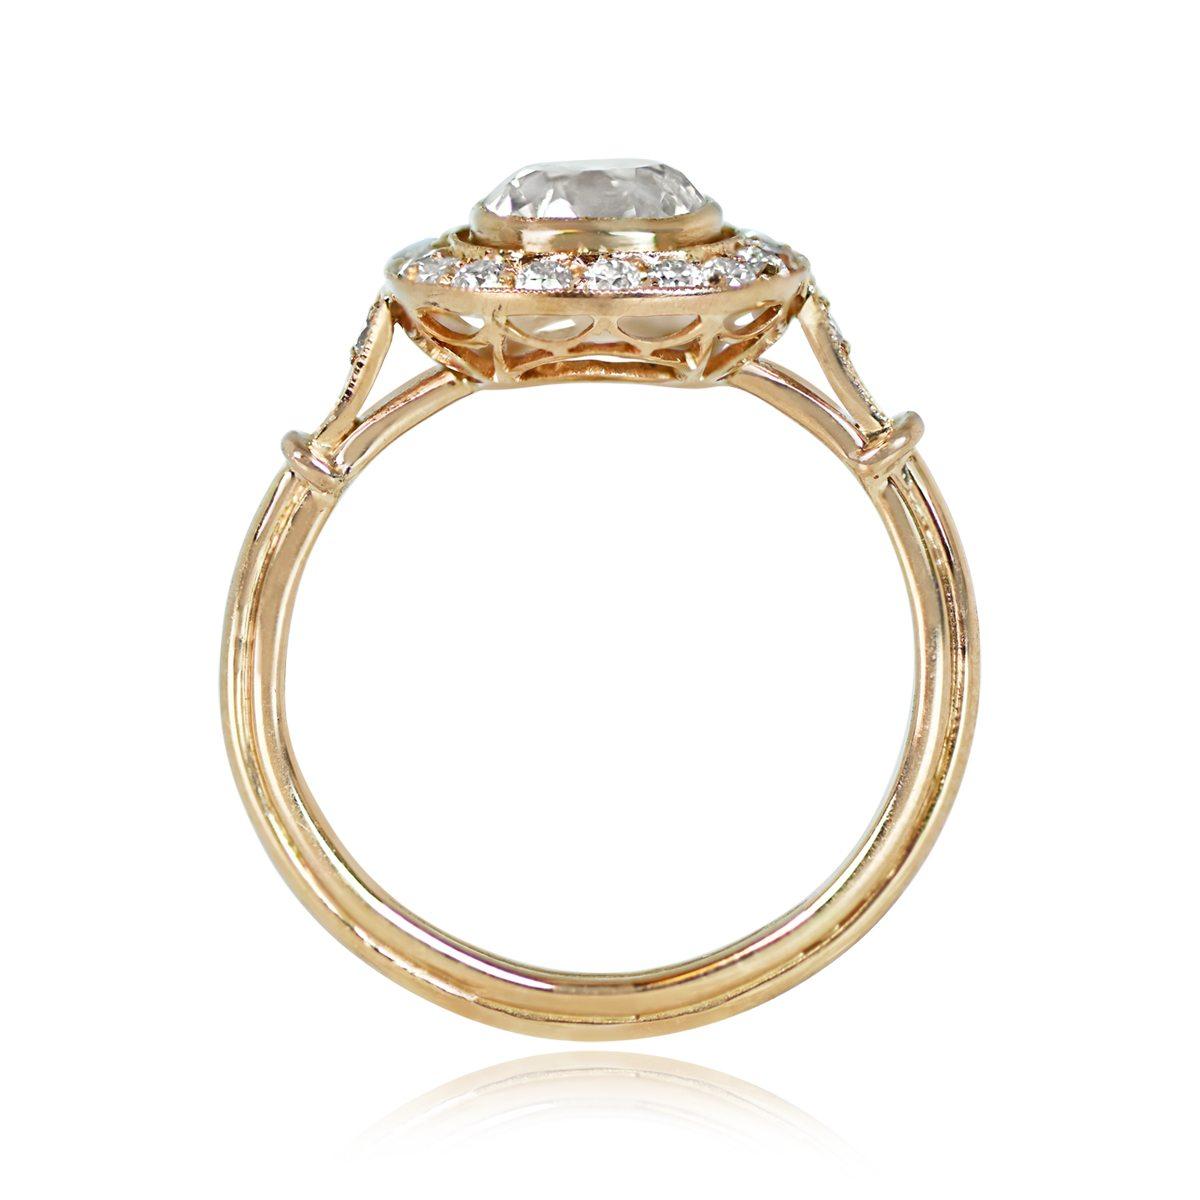 1.16ct Antique Cushion Cut Diamond Engagement Ring, Diamond Halo, 18k YellowGold In Excellent Condition For Sale In New York, NY